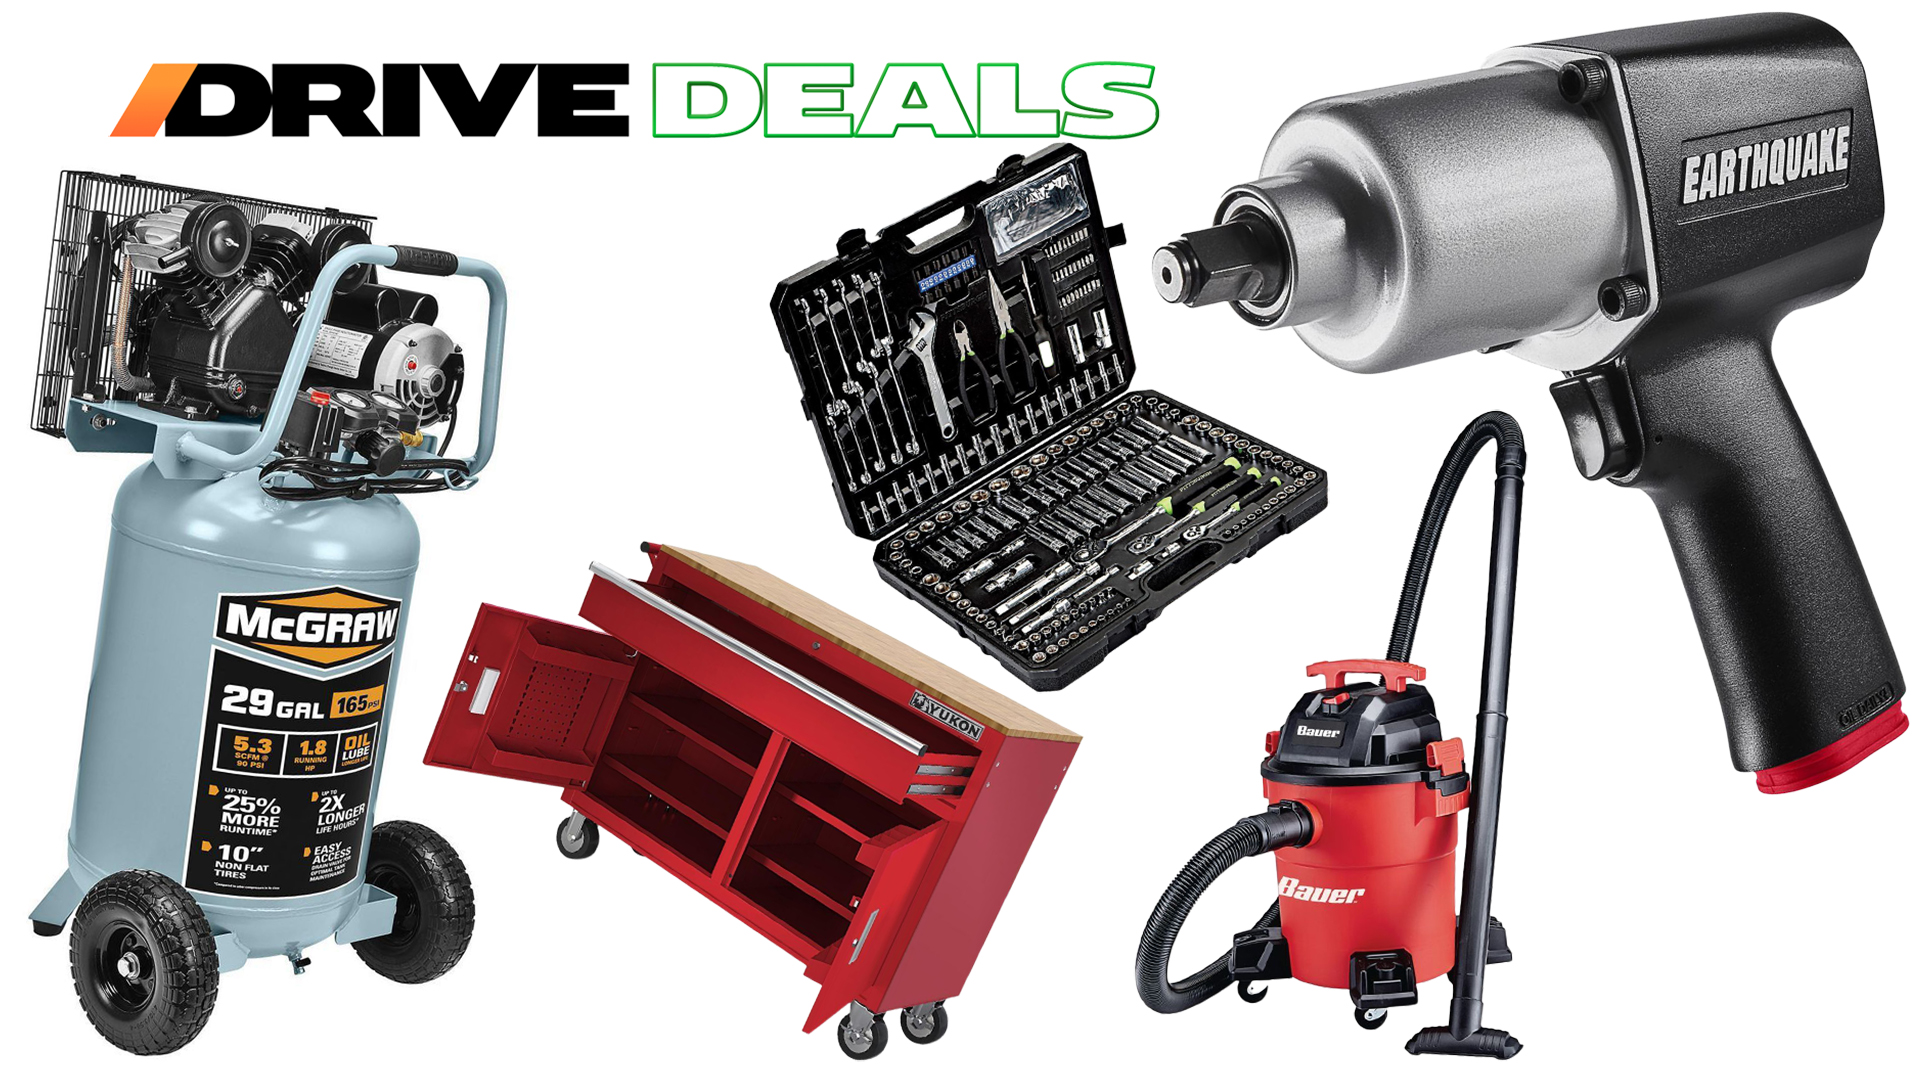 Stock Up With Great Tool Deals From Harbor Freight